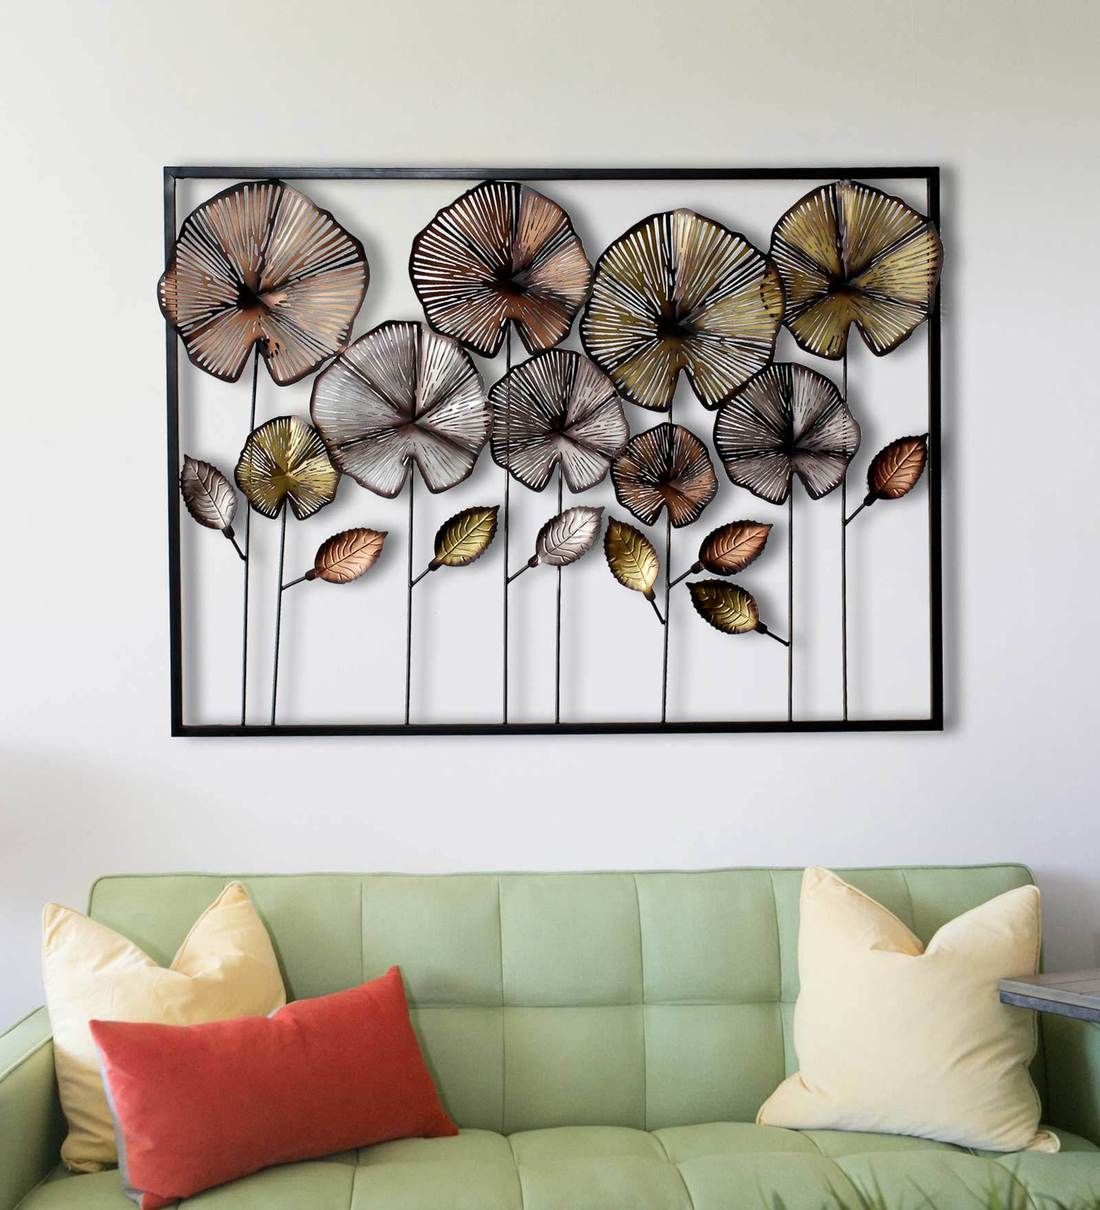 Deco 79 Metal Leaf Tall Cut Out Wall Decor With Intricate Laser Cut  Designs, Set Of 12w, 30h, Black | Forum.iktva (View 7 of 20)